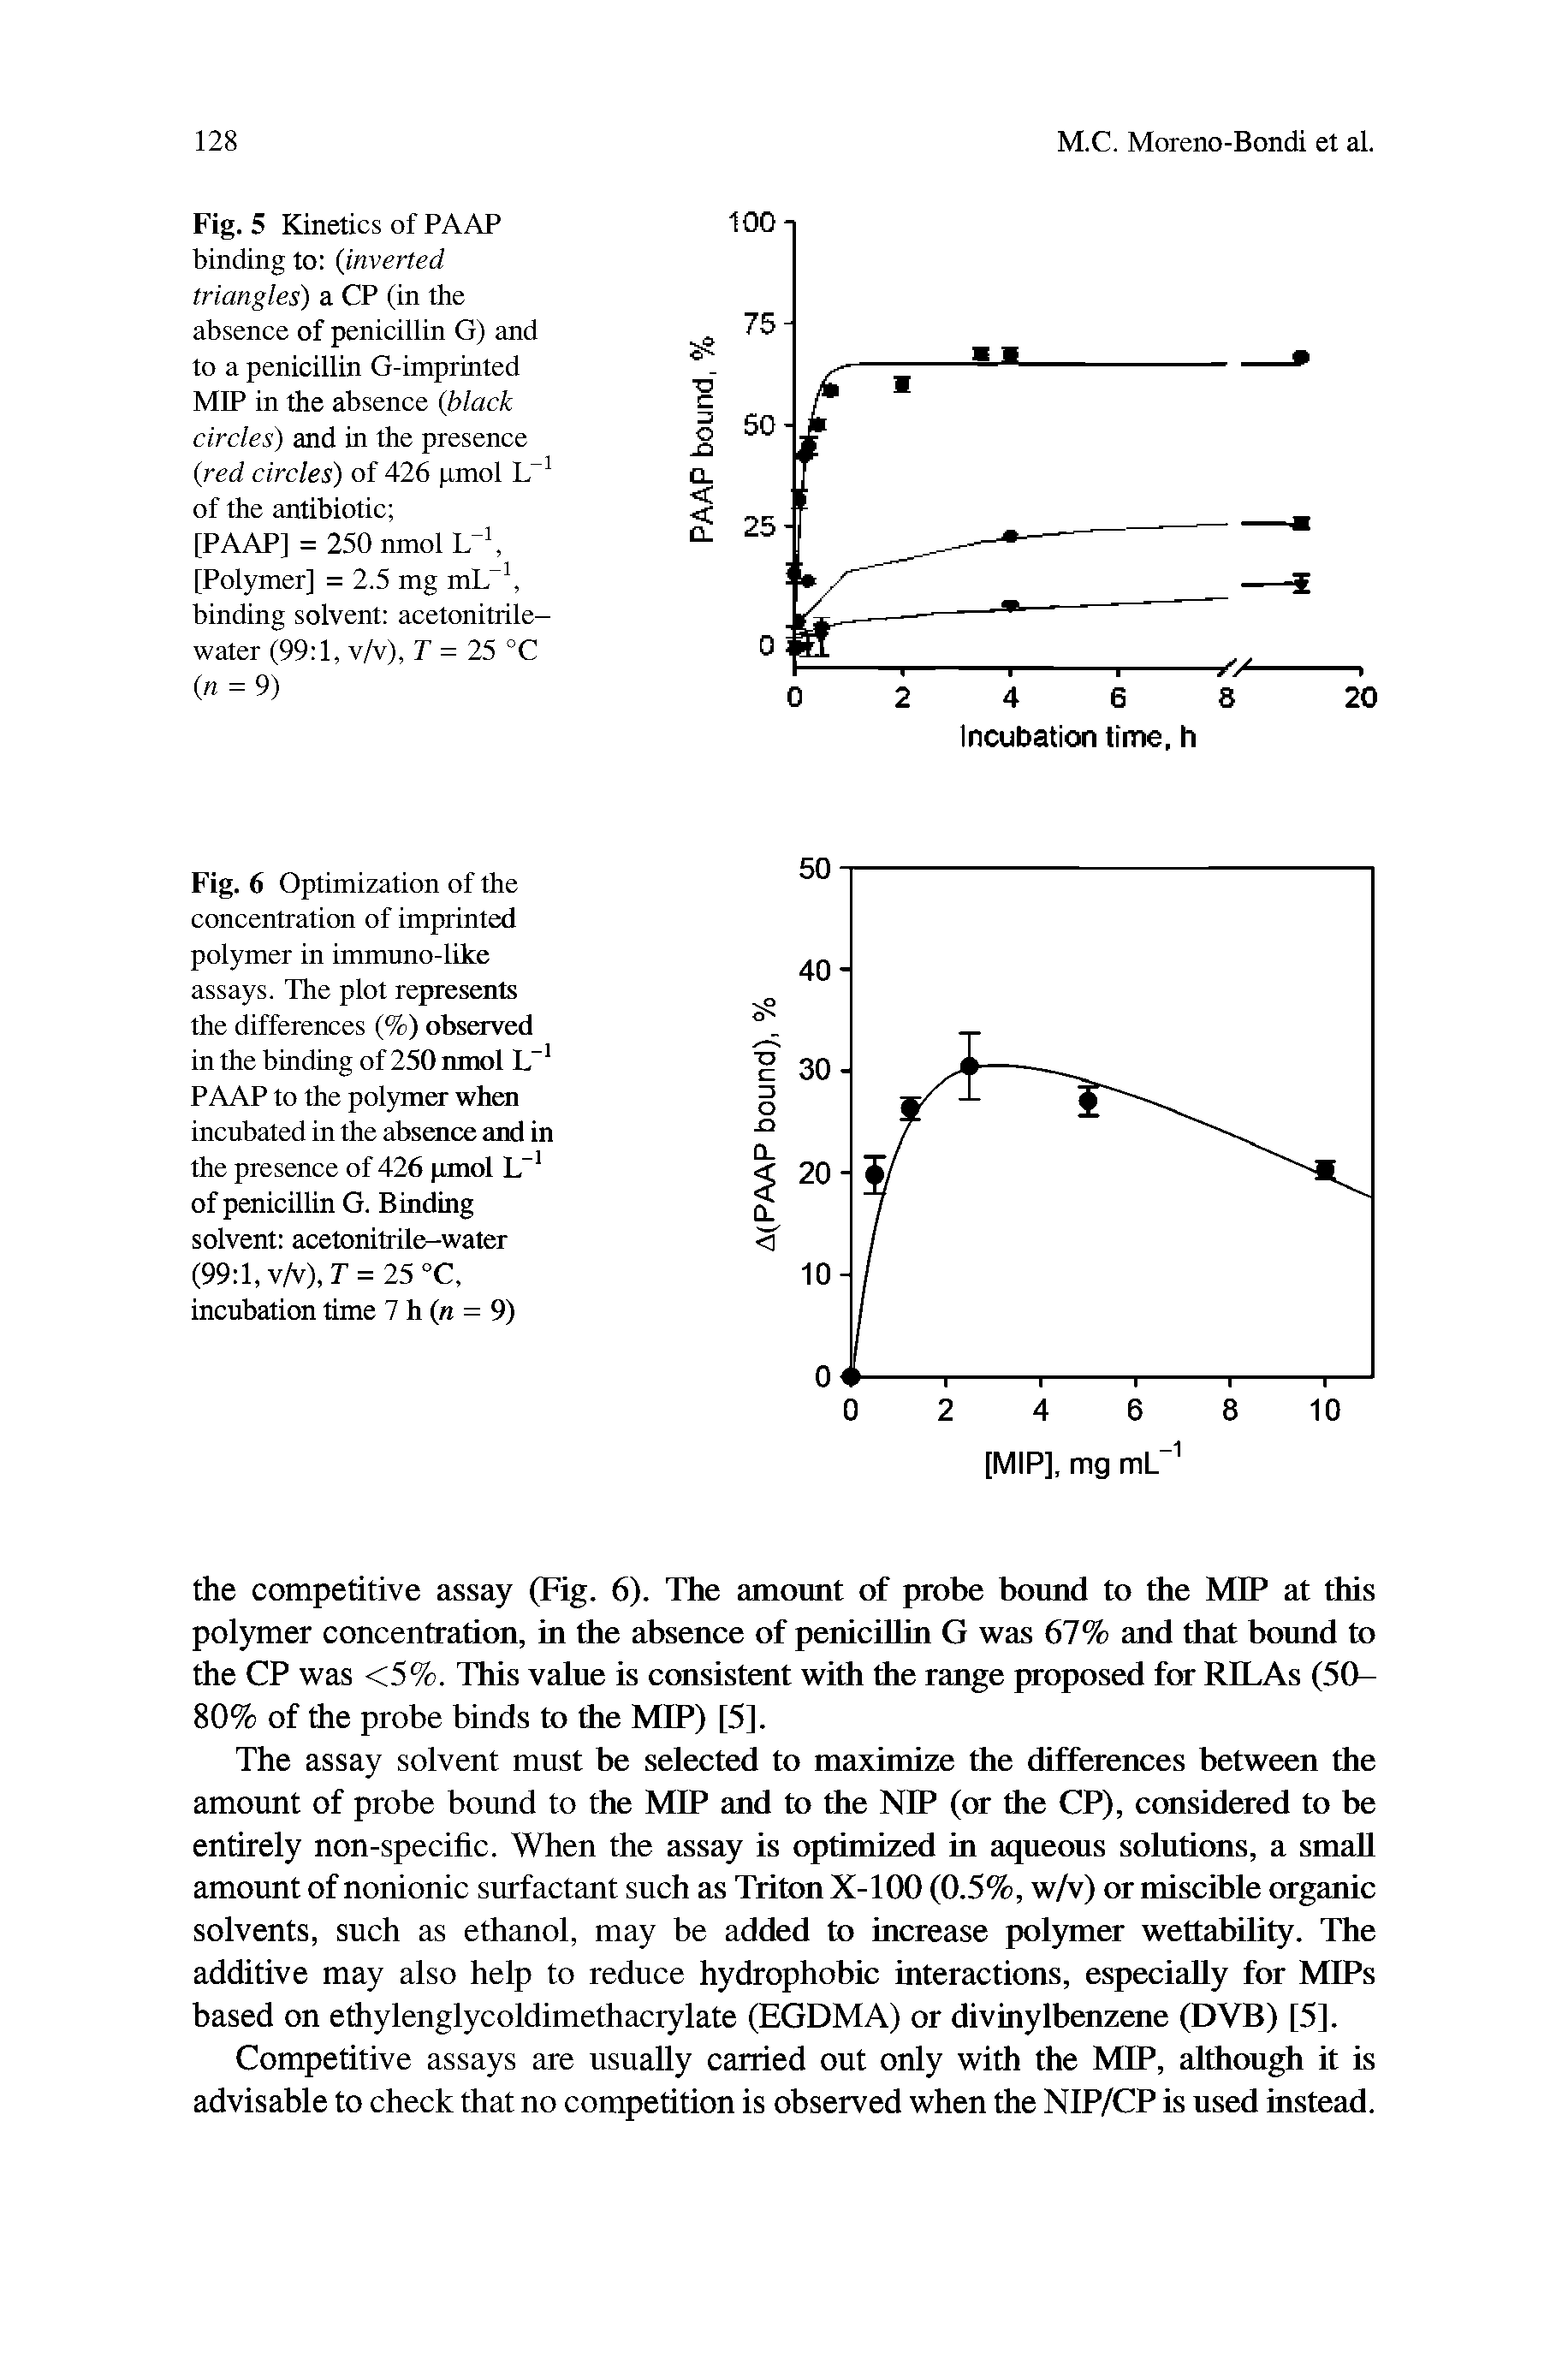 Fig. 6 Optimization of the concentration of imprinted polymer in immuno-like assays. The plot represents the differences (%) observed in the binding of 250 nmol L-1 PAAP to the polymer when incubated in the absence and in the presence of 426 pmol L-1 of penicillin G. Binding solvent acetonitrile-water (99 1, v/v), T = 25 °C, incubation time 7 h n = 9)...